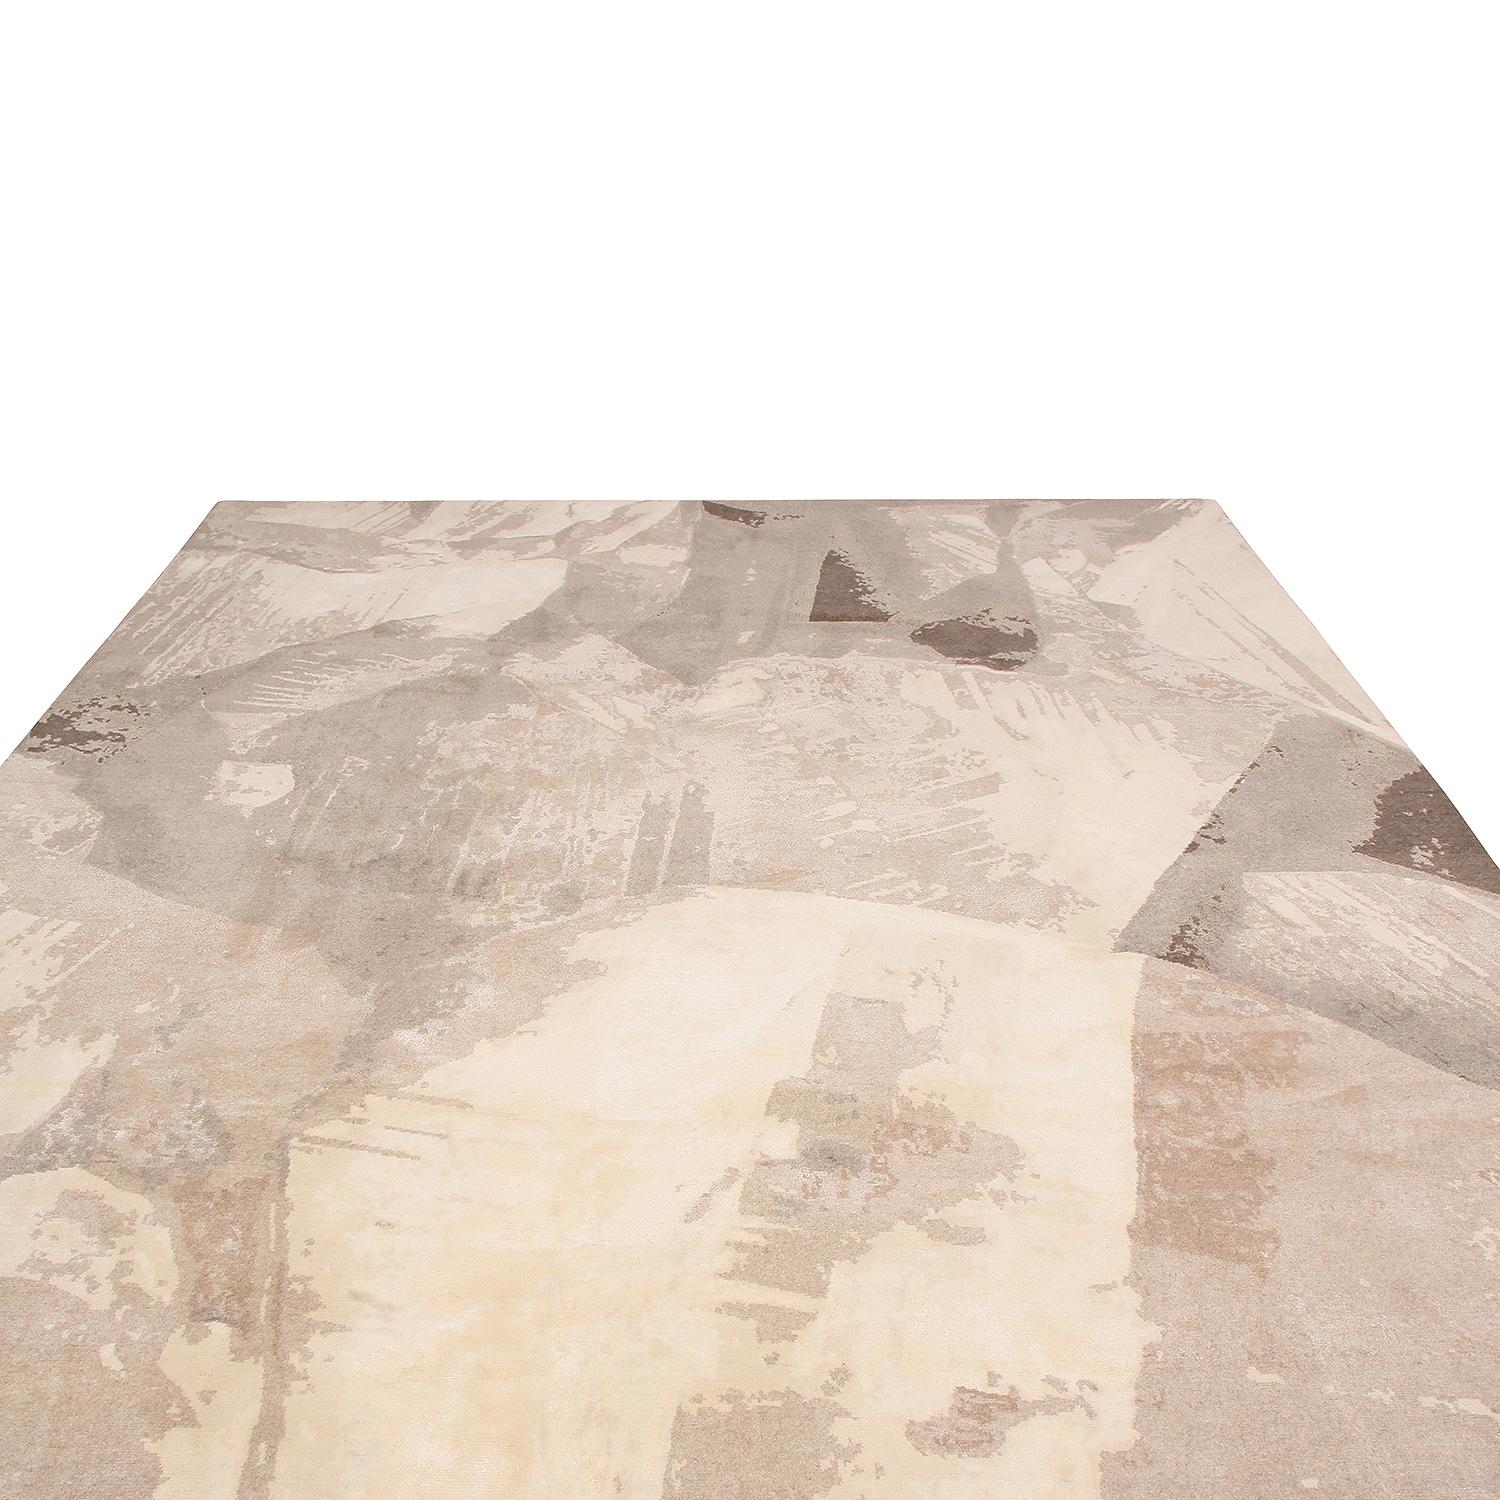 Hand knotted in one of the most reputed workshops in Nepal, this contemporary rug enjoys a chic, painterly field design complementing the warm-meets-rustic hues of beige and brown. The exceptional large-scale graph and subtle, natural sheen of